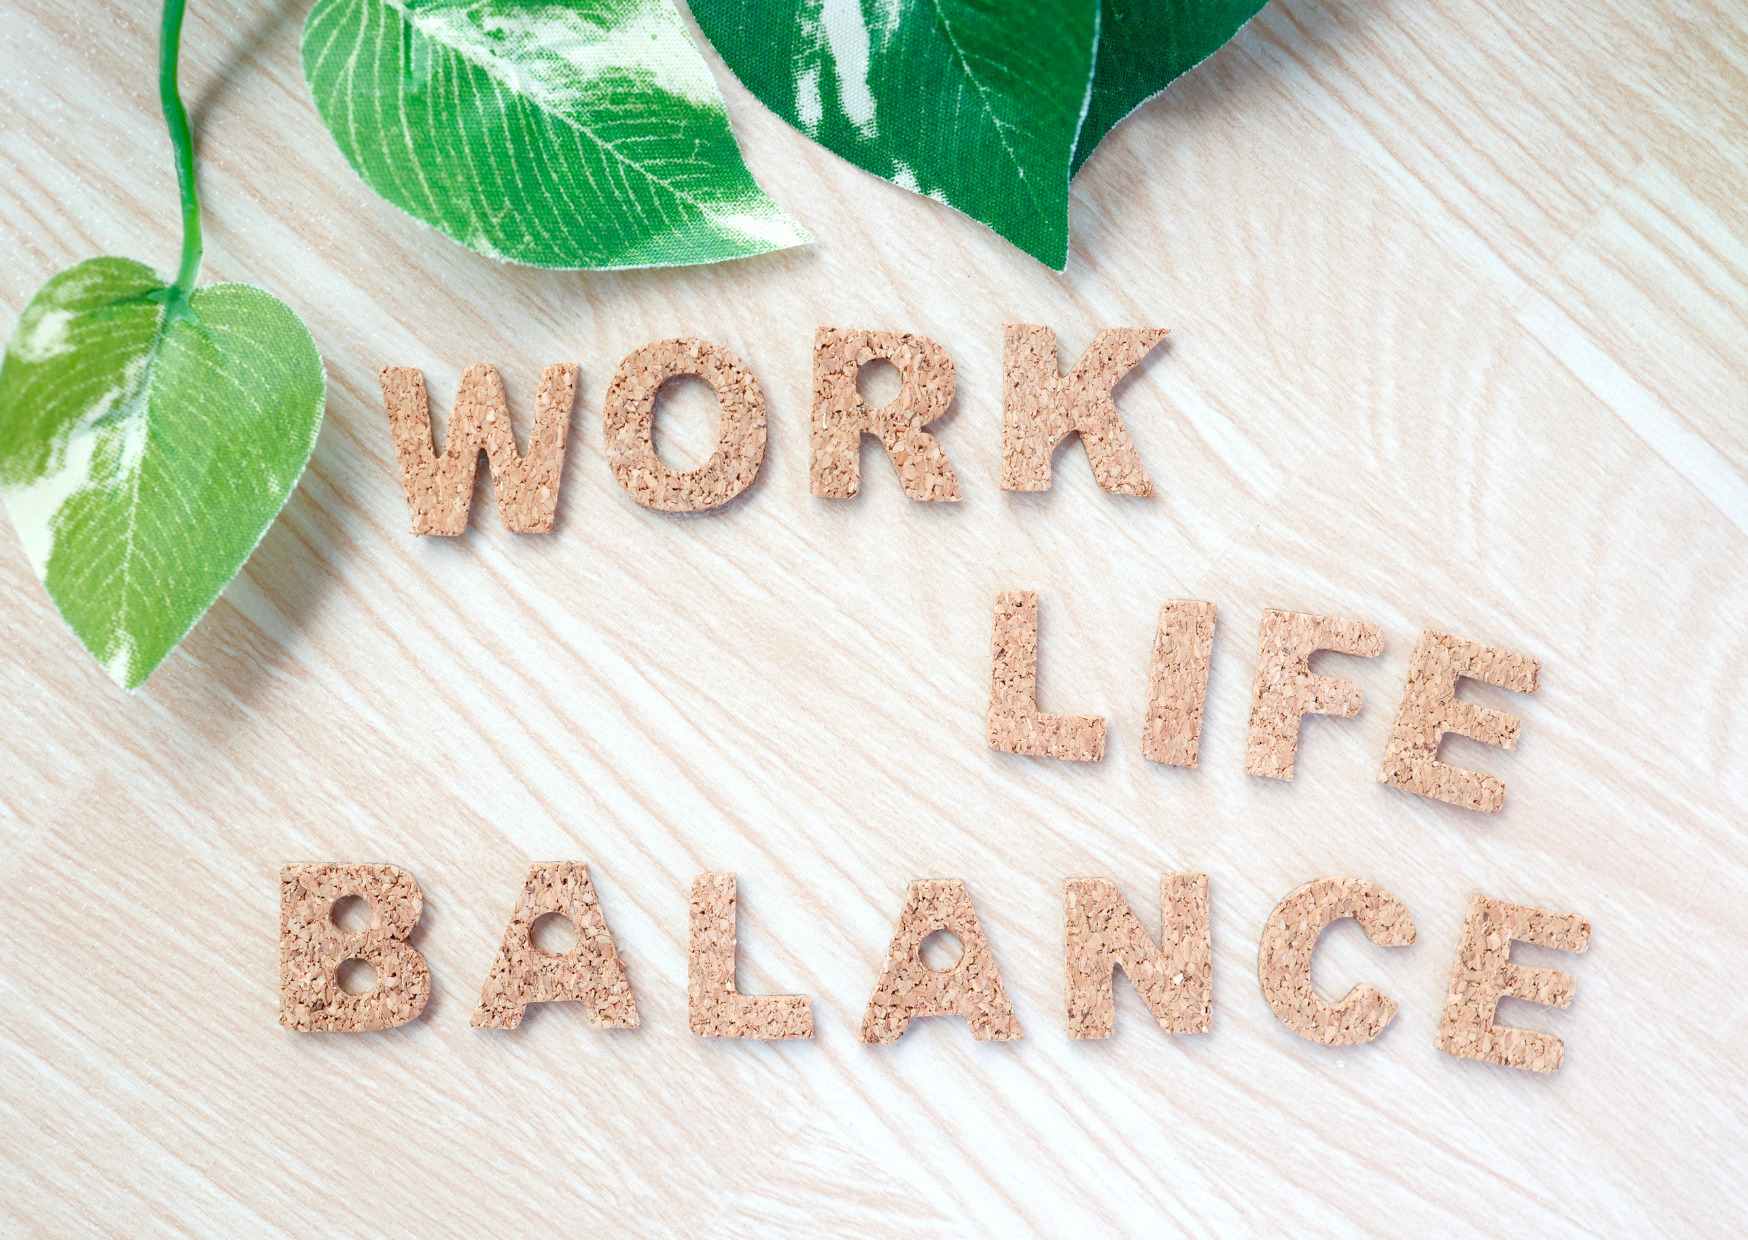 Creating a Work-Life Balance: Strategies for Employers to Support Employee Wellbeing